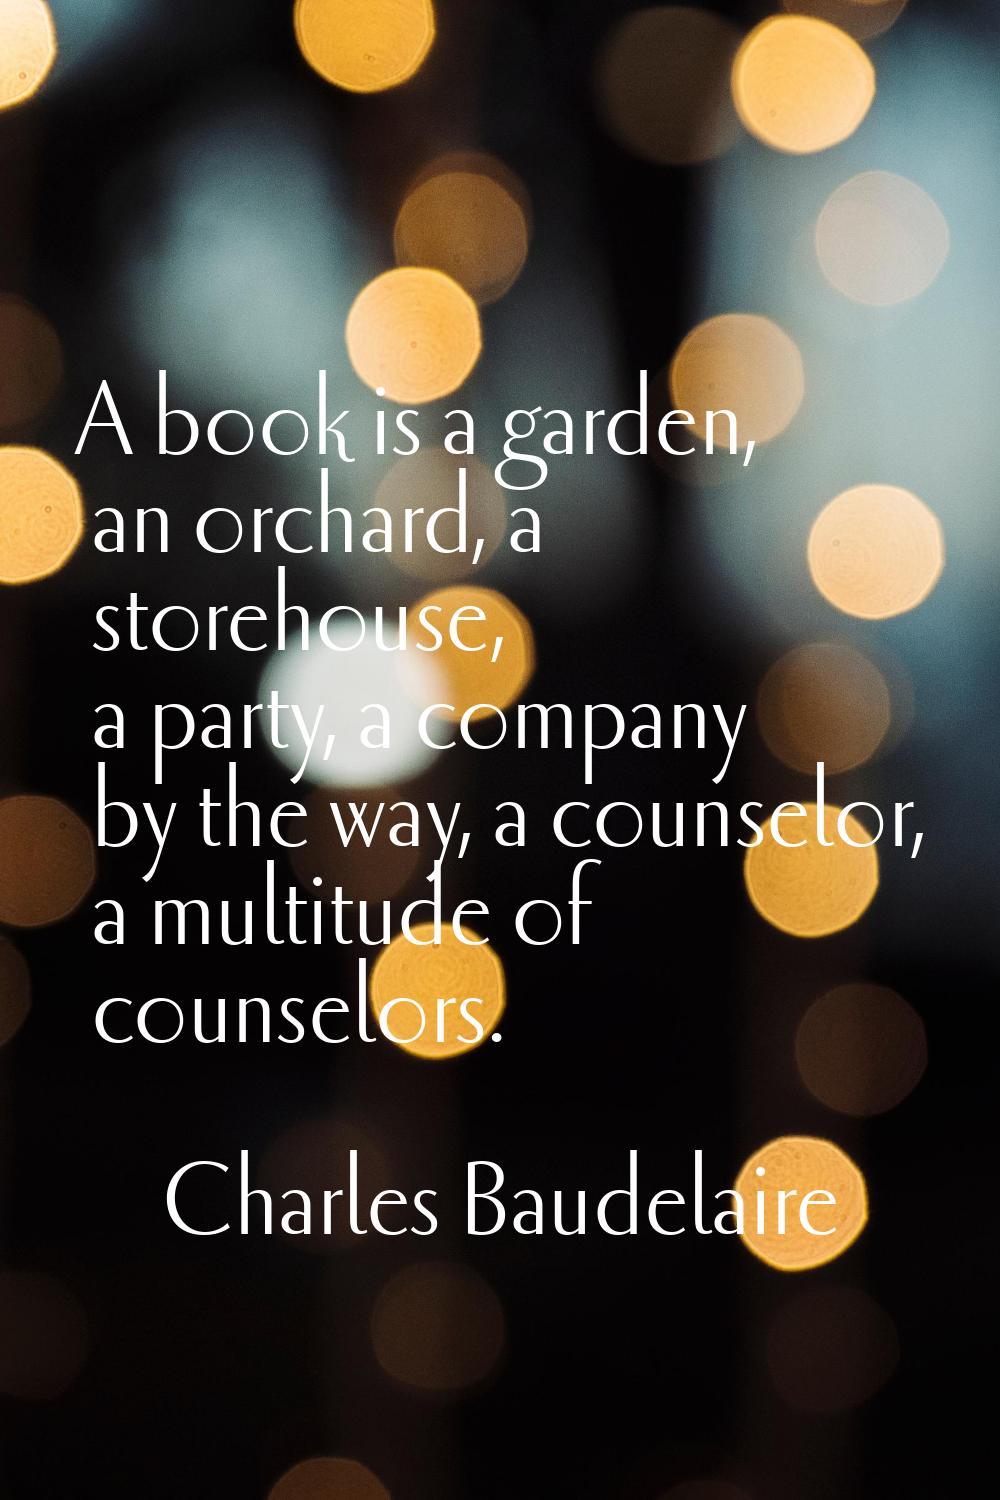 A book is a garden, an orchard, a storehouse, a party, a company by the way, a counselor, a multitu